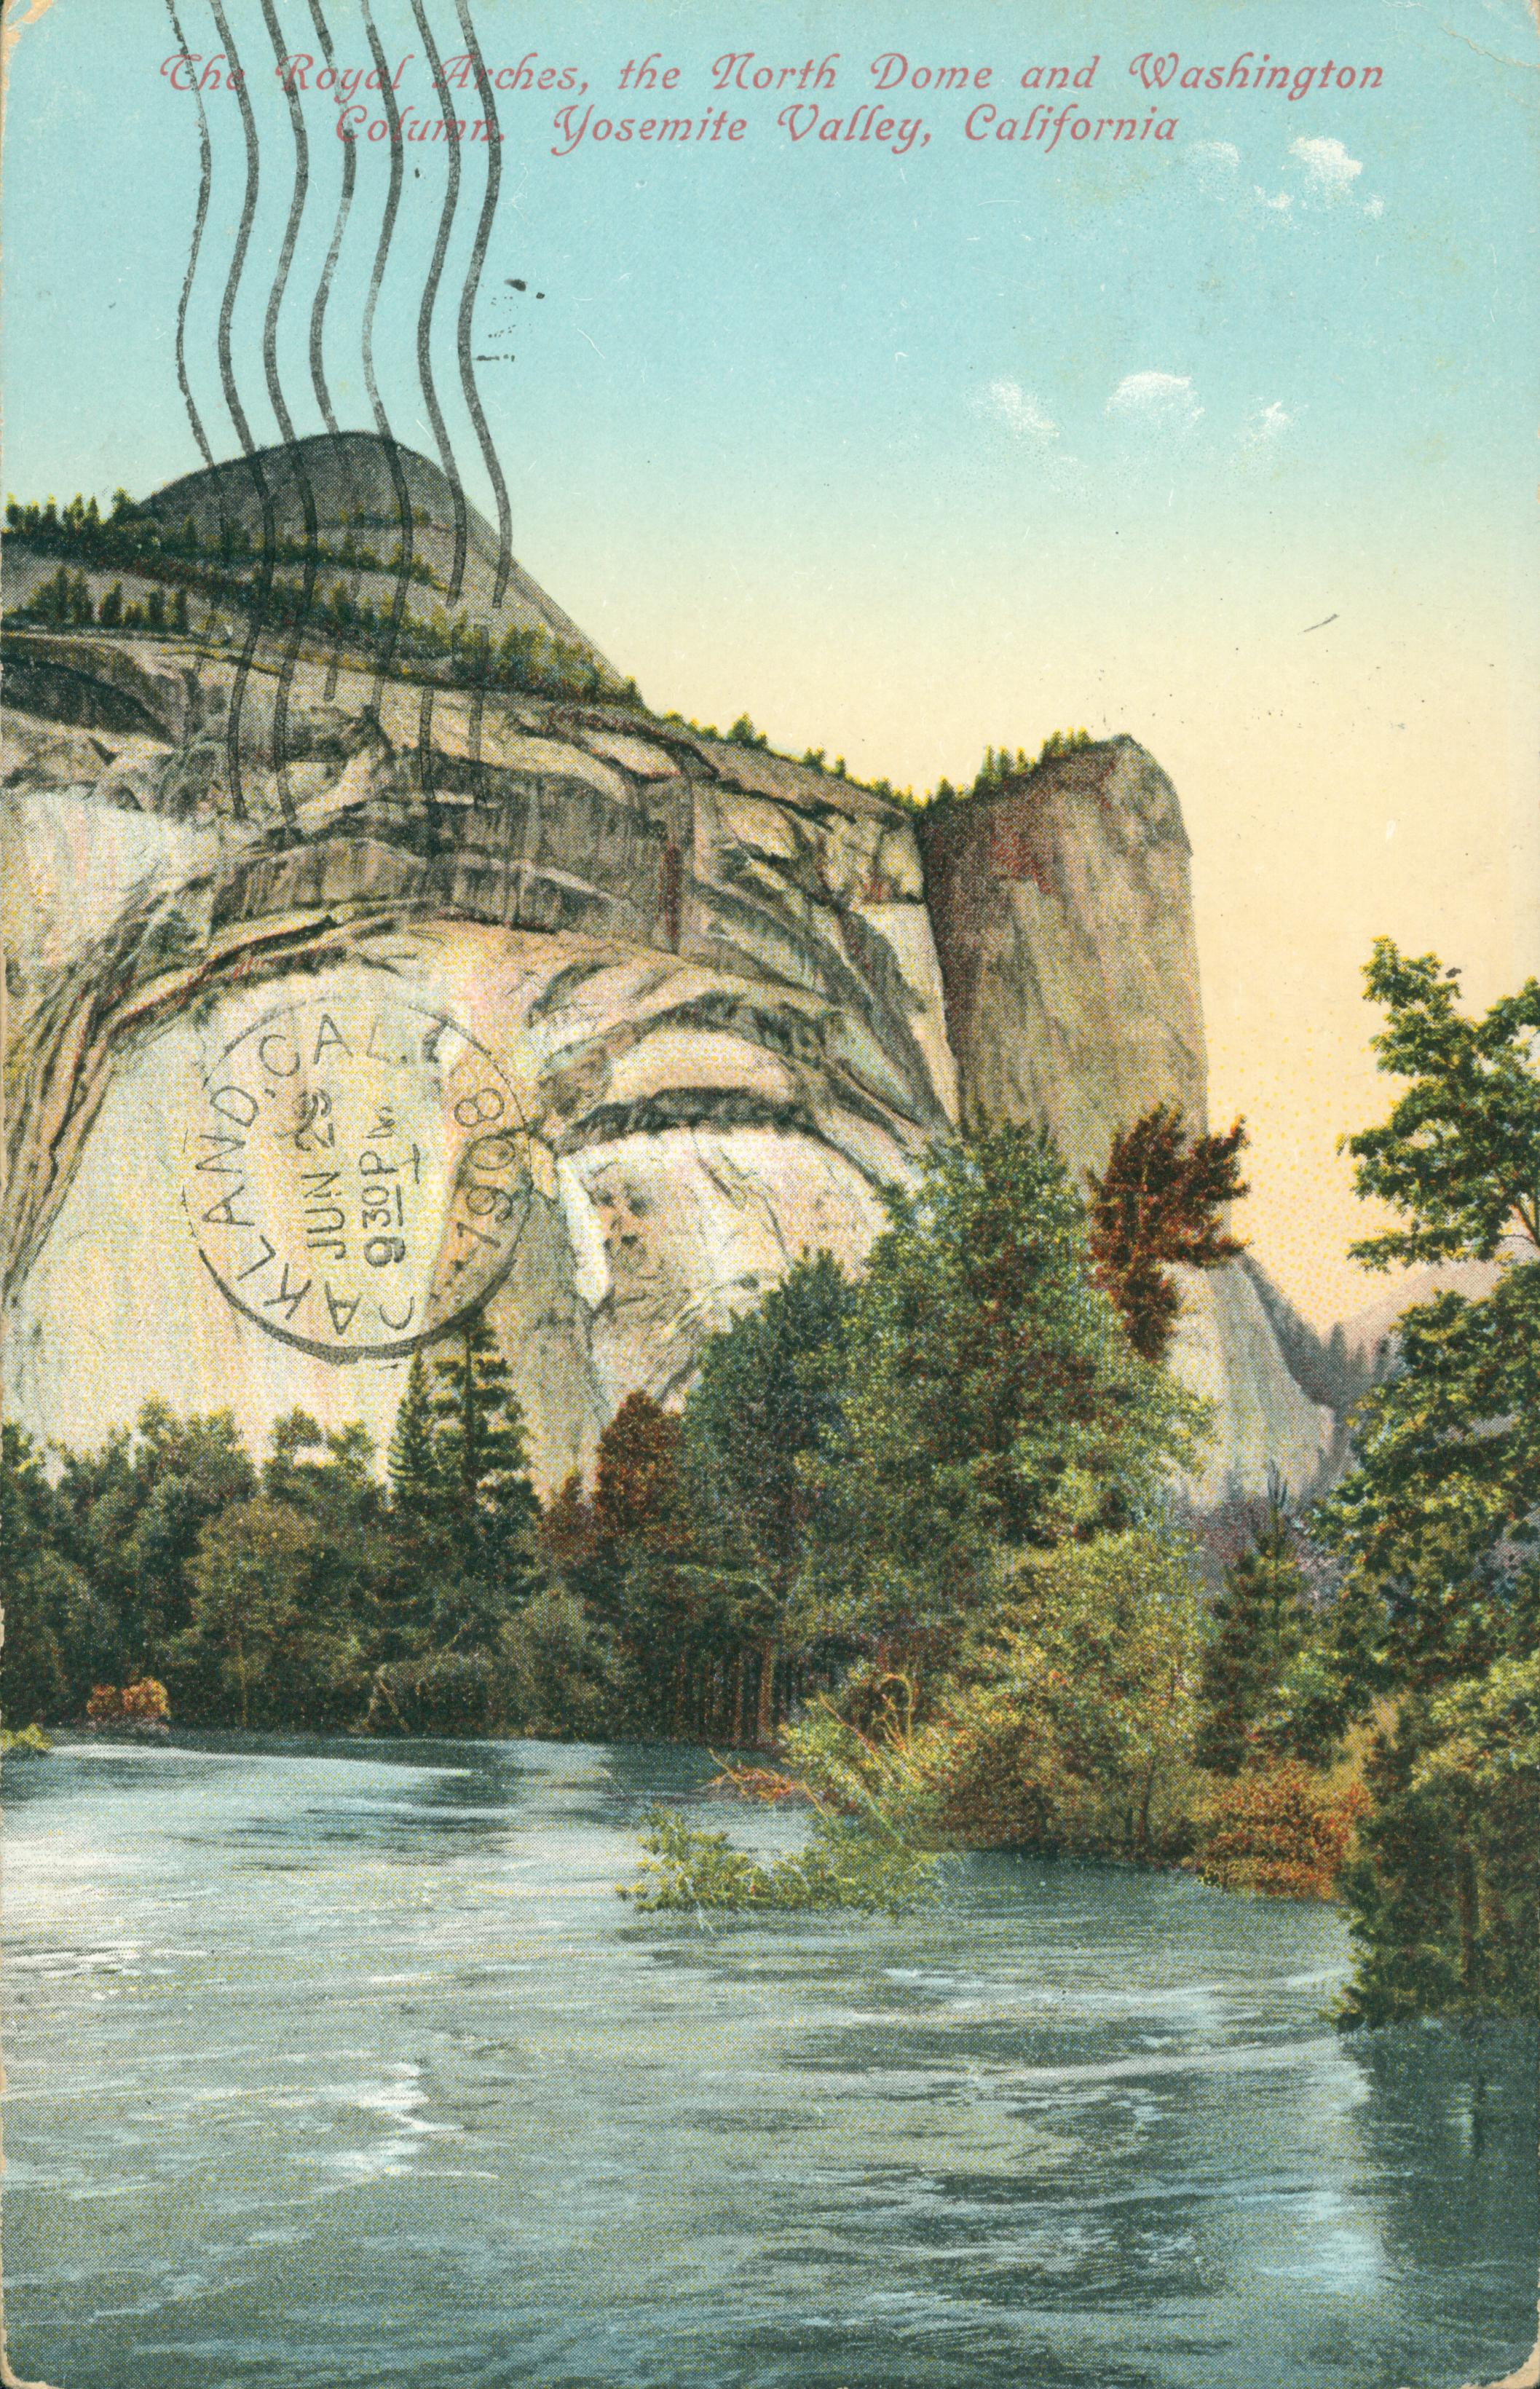 Shows the Merced River with the Washington Column and North Dome in the background